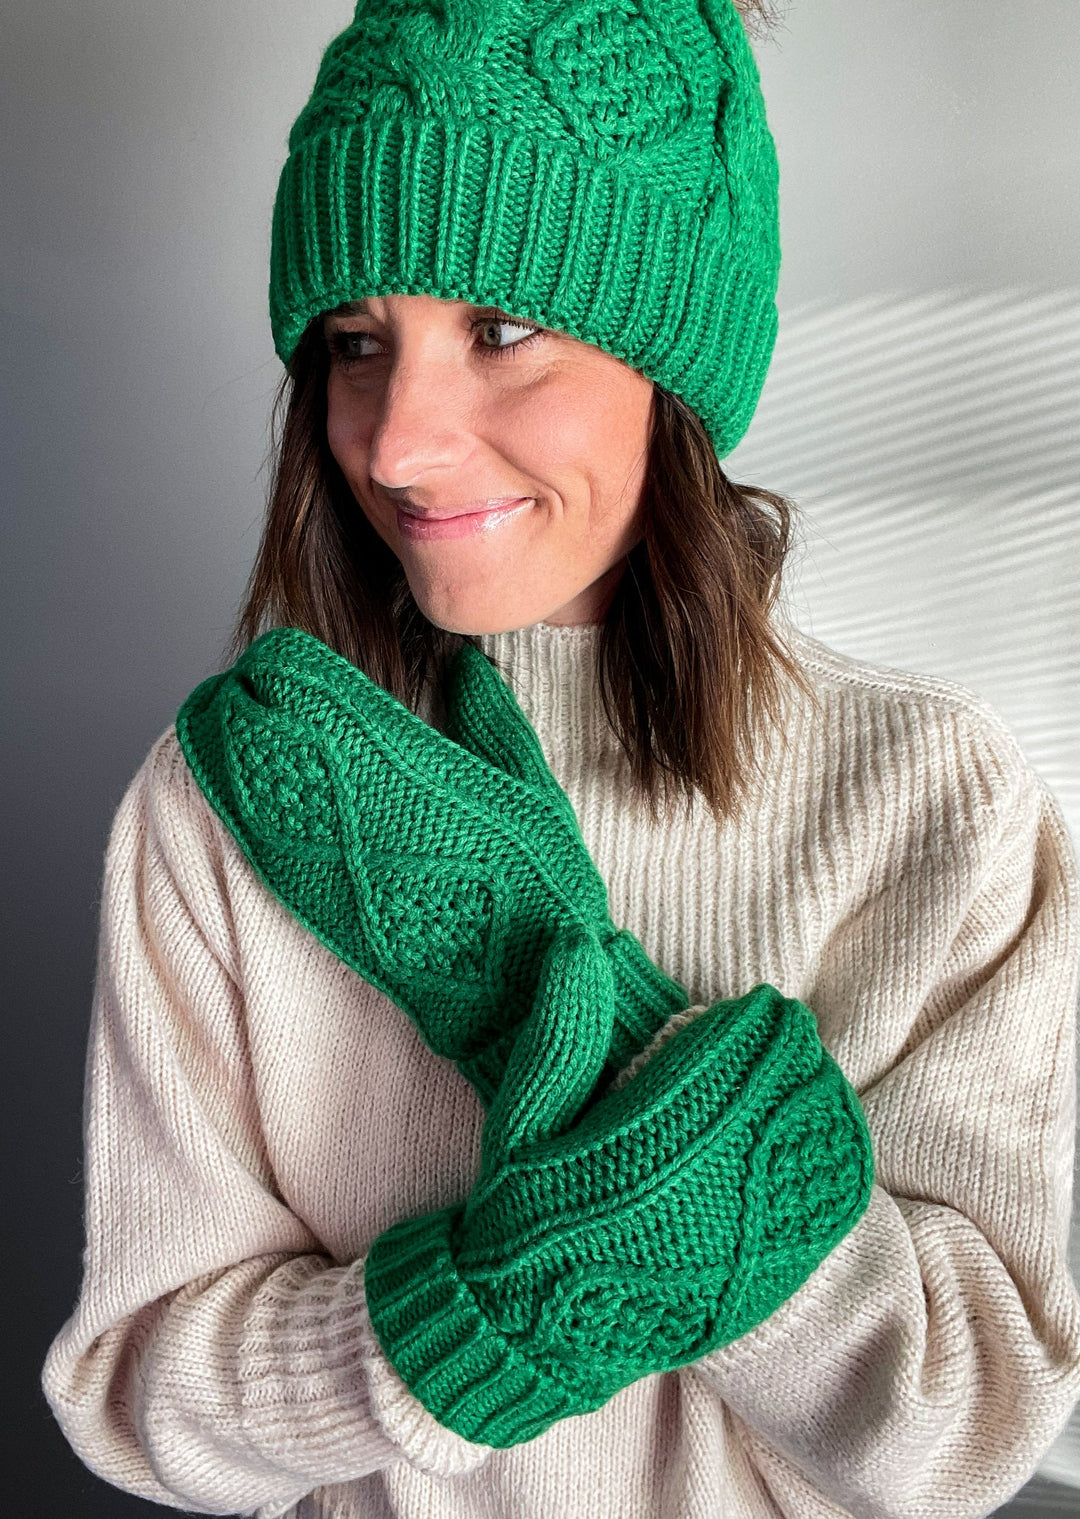 Warm Mittens - Kelly Green Cable Knit Mittens